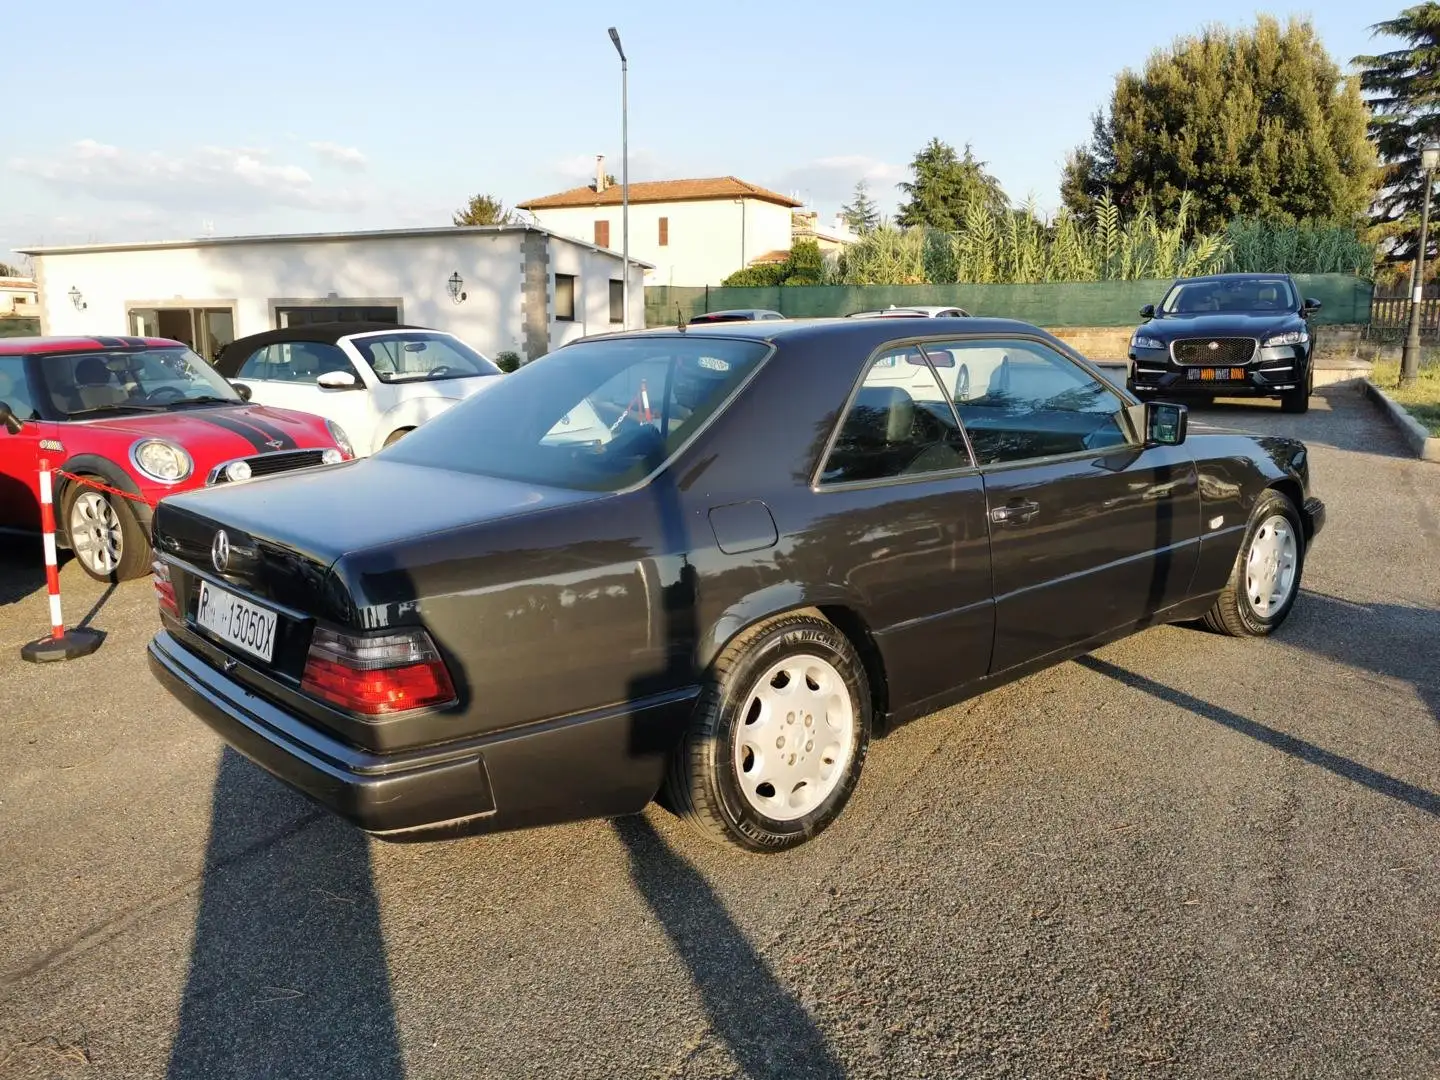 Mercedes-Benz CE 230 COUPE - ABS  - 1989 - RATE AUTO MOTO SCOOTER Schwarz - 2